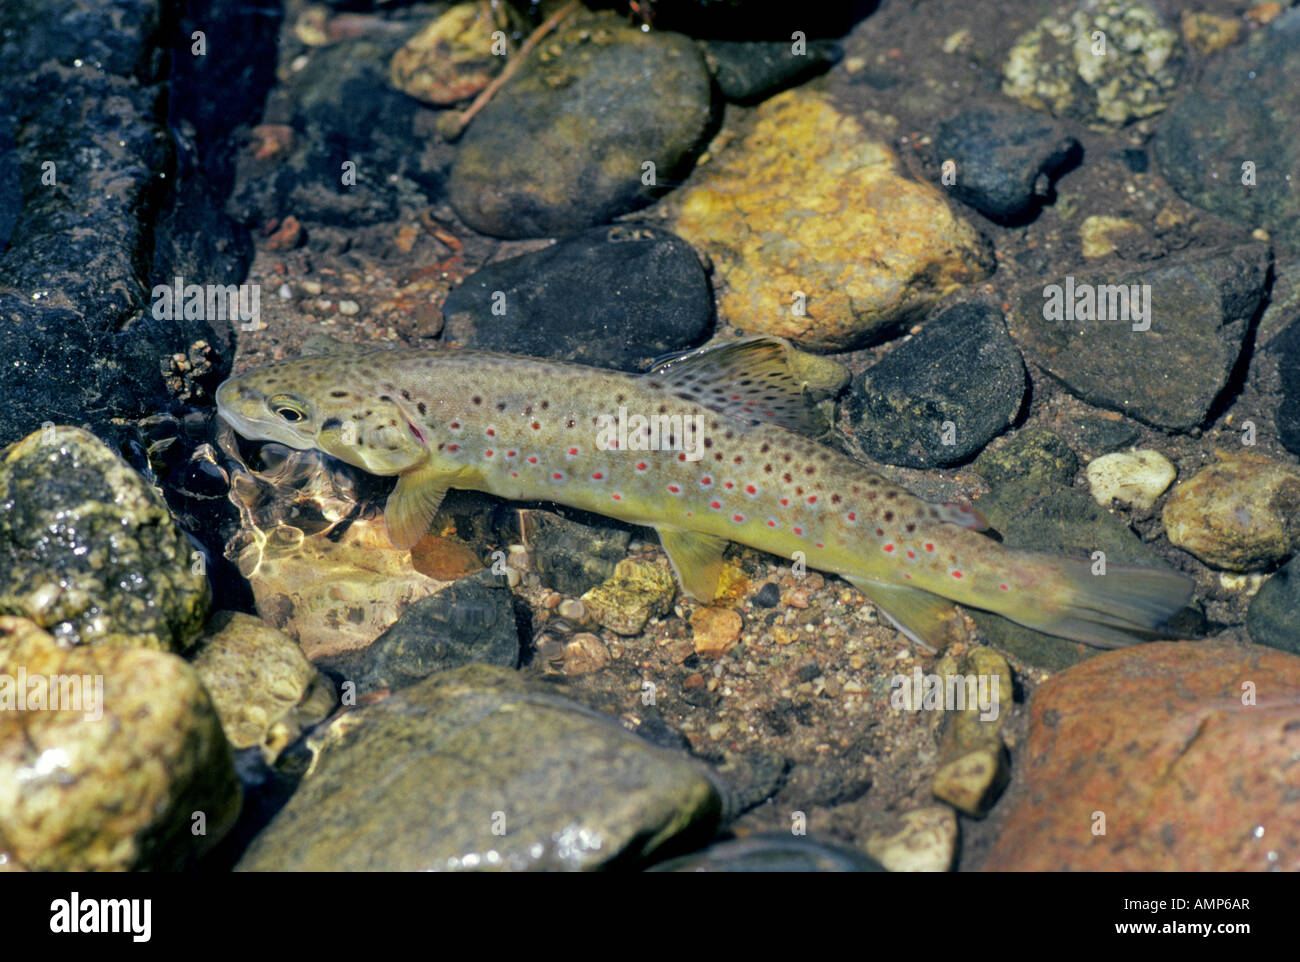 A large German brown trout waiting for floating insects in a trout stream in the Rockies near Salinas Colorado Stock Photo